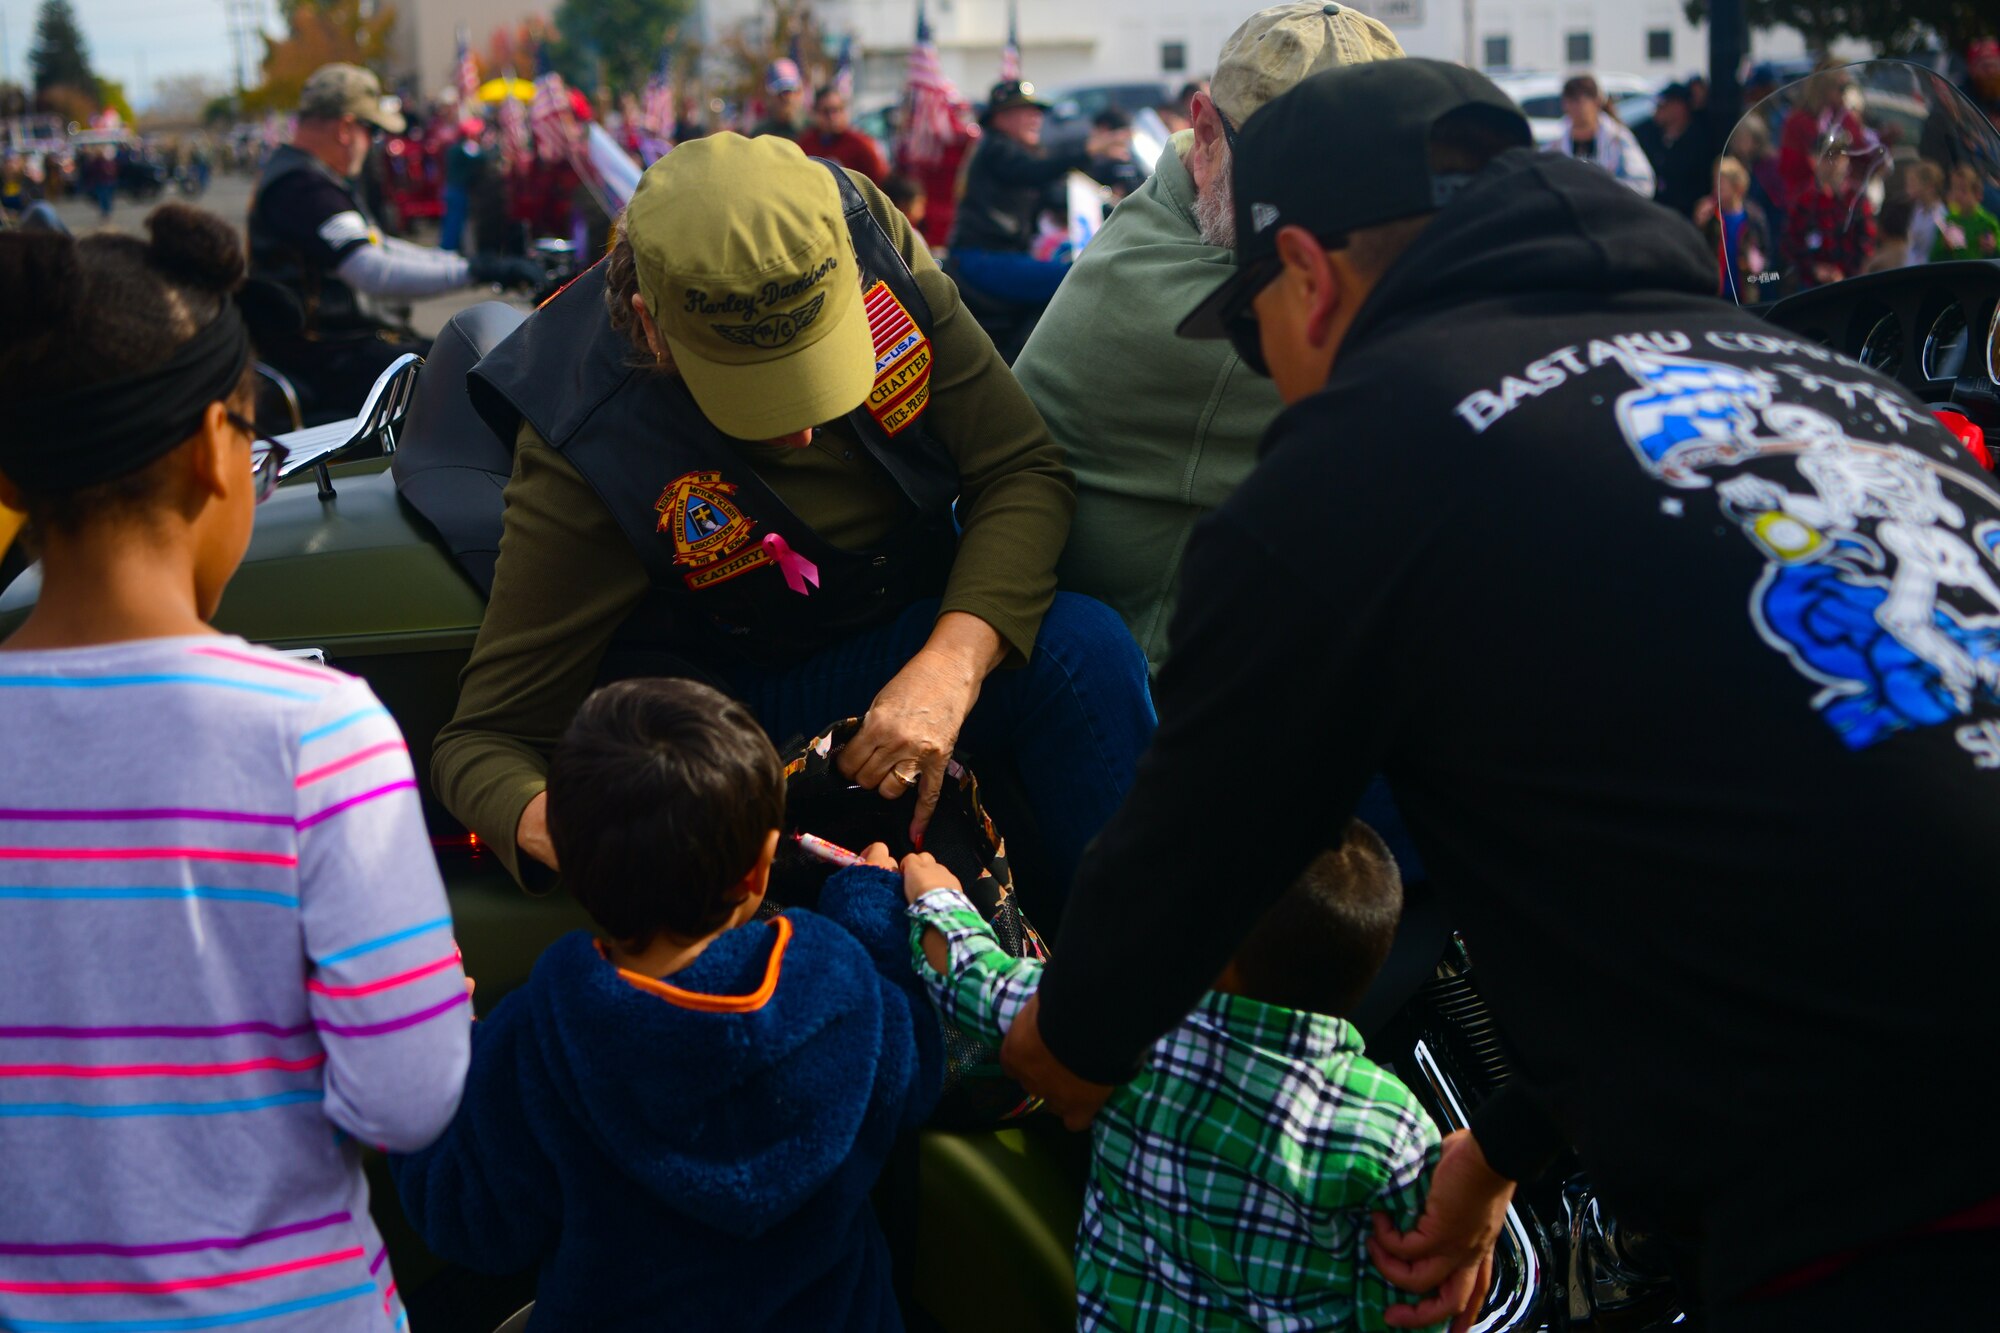 Parade participants hand out candy during the Veterans Day parade in Marysville, Calif., on Nov. 11, 2022.